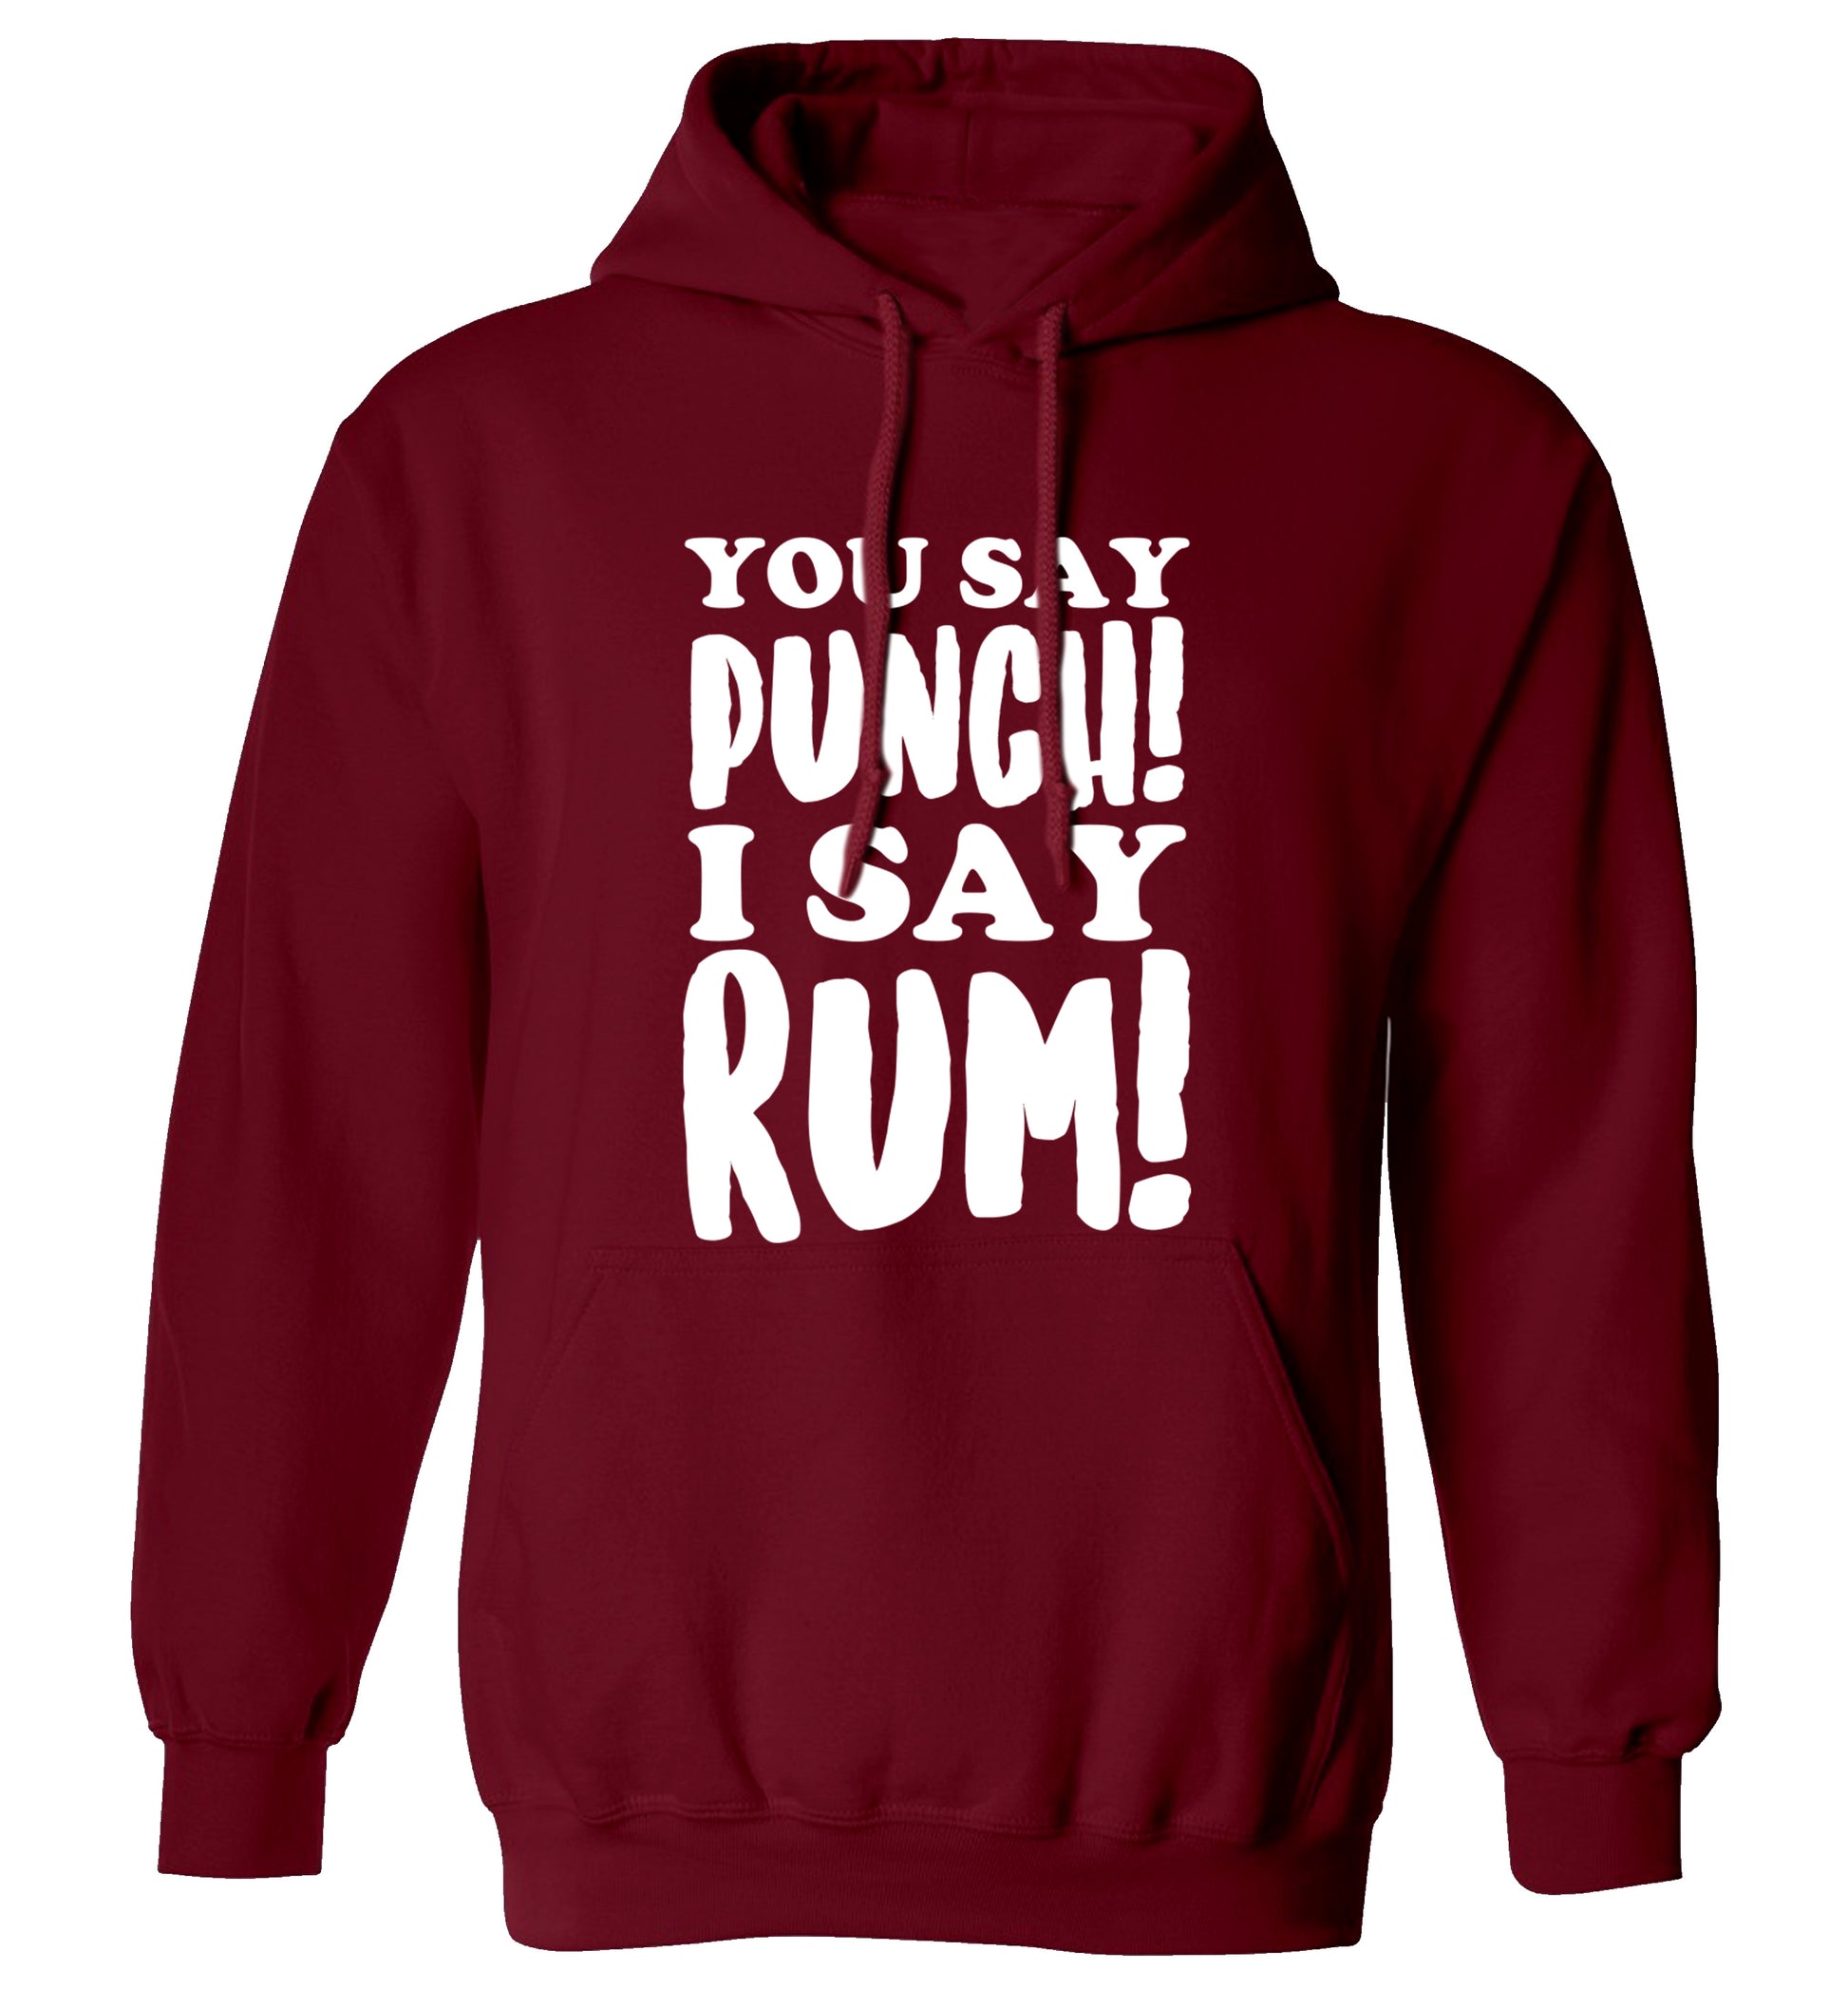 You say punch I say rum! adults unisex maroon hoodie 2XL